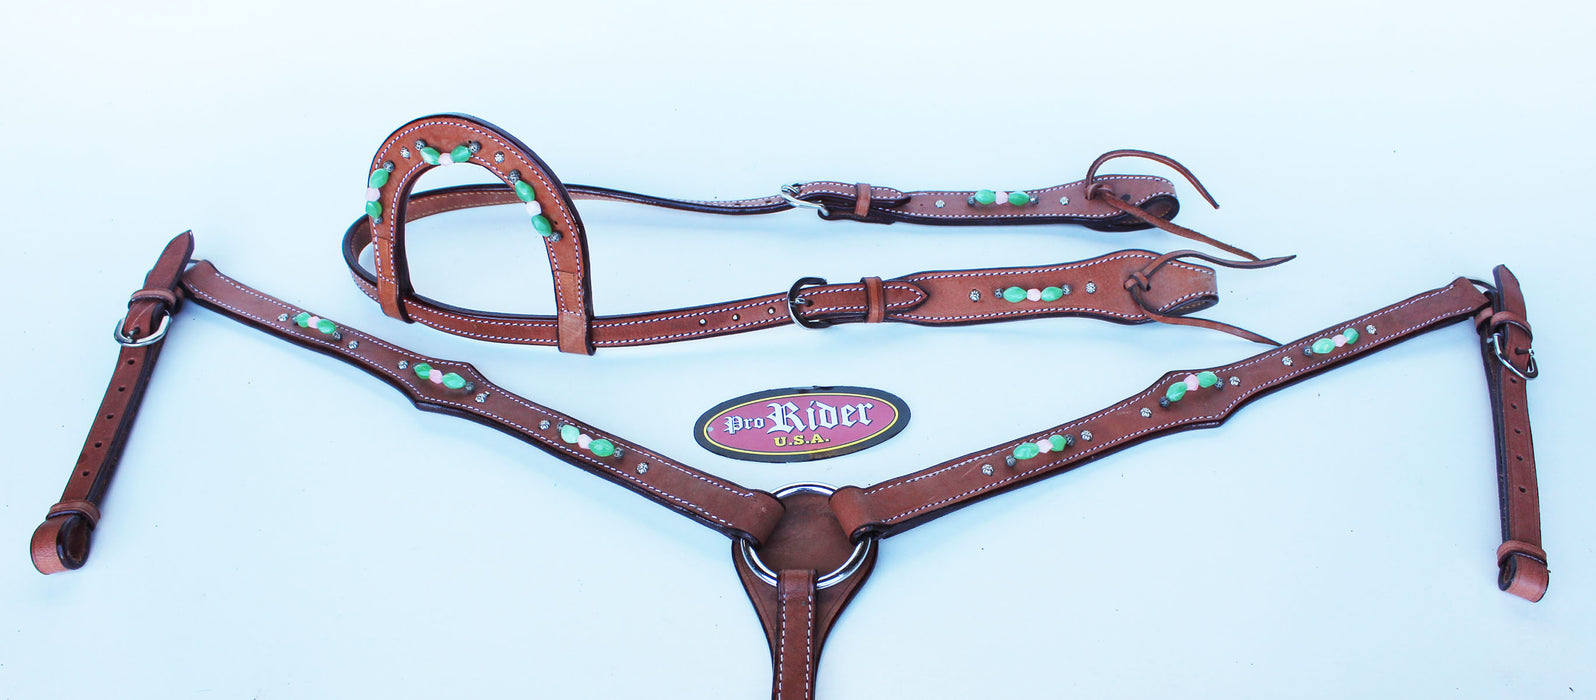 Show Tack Horse Bridle Western Leather Headstall Breast Collar Green 8221